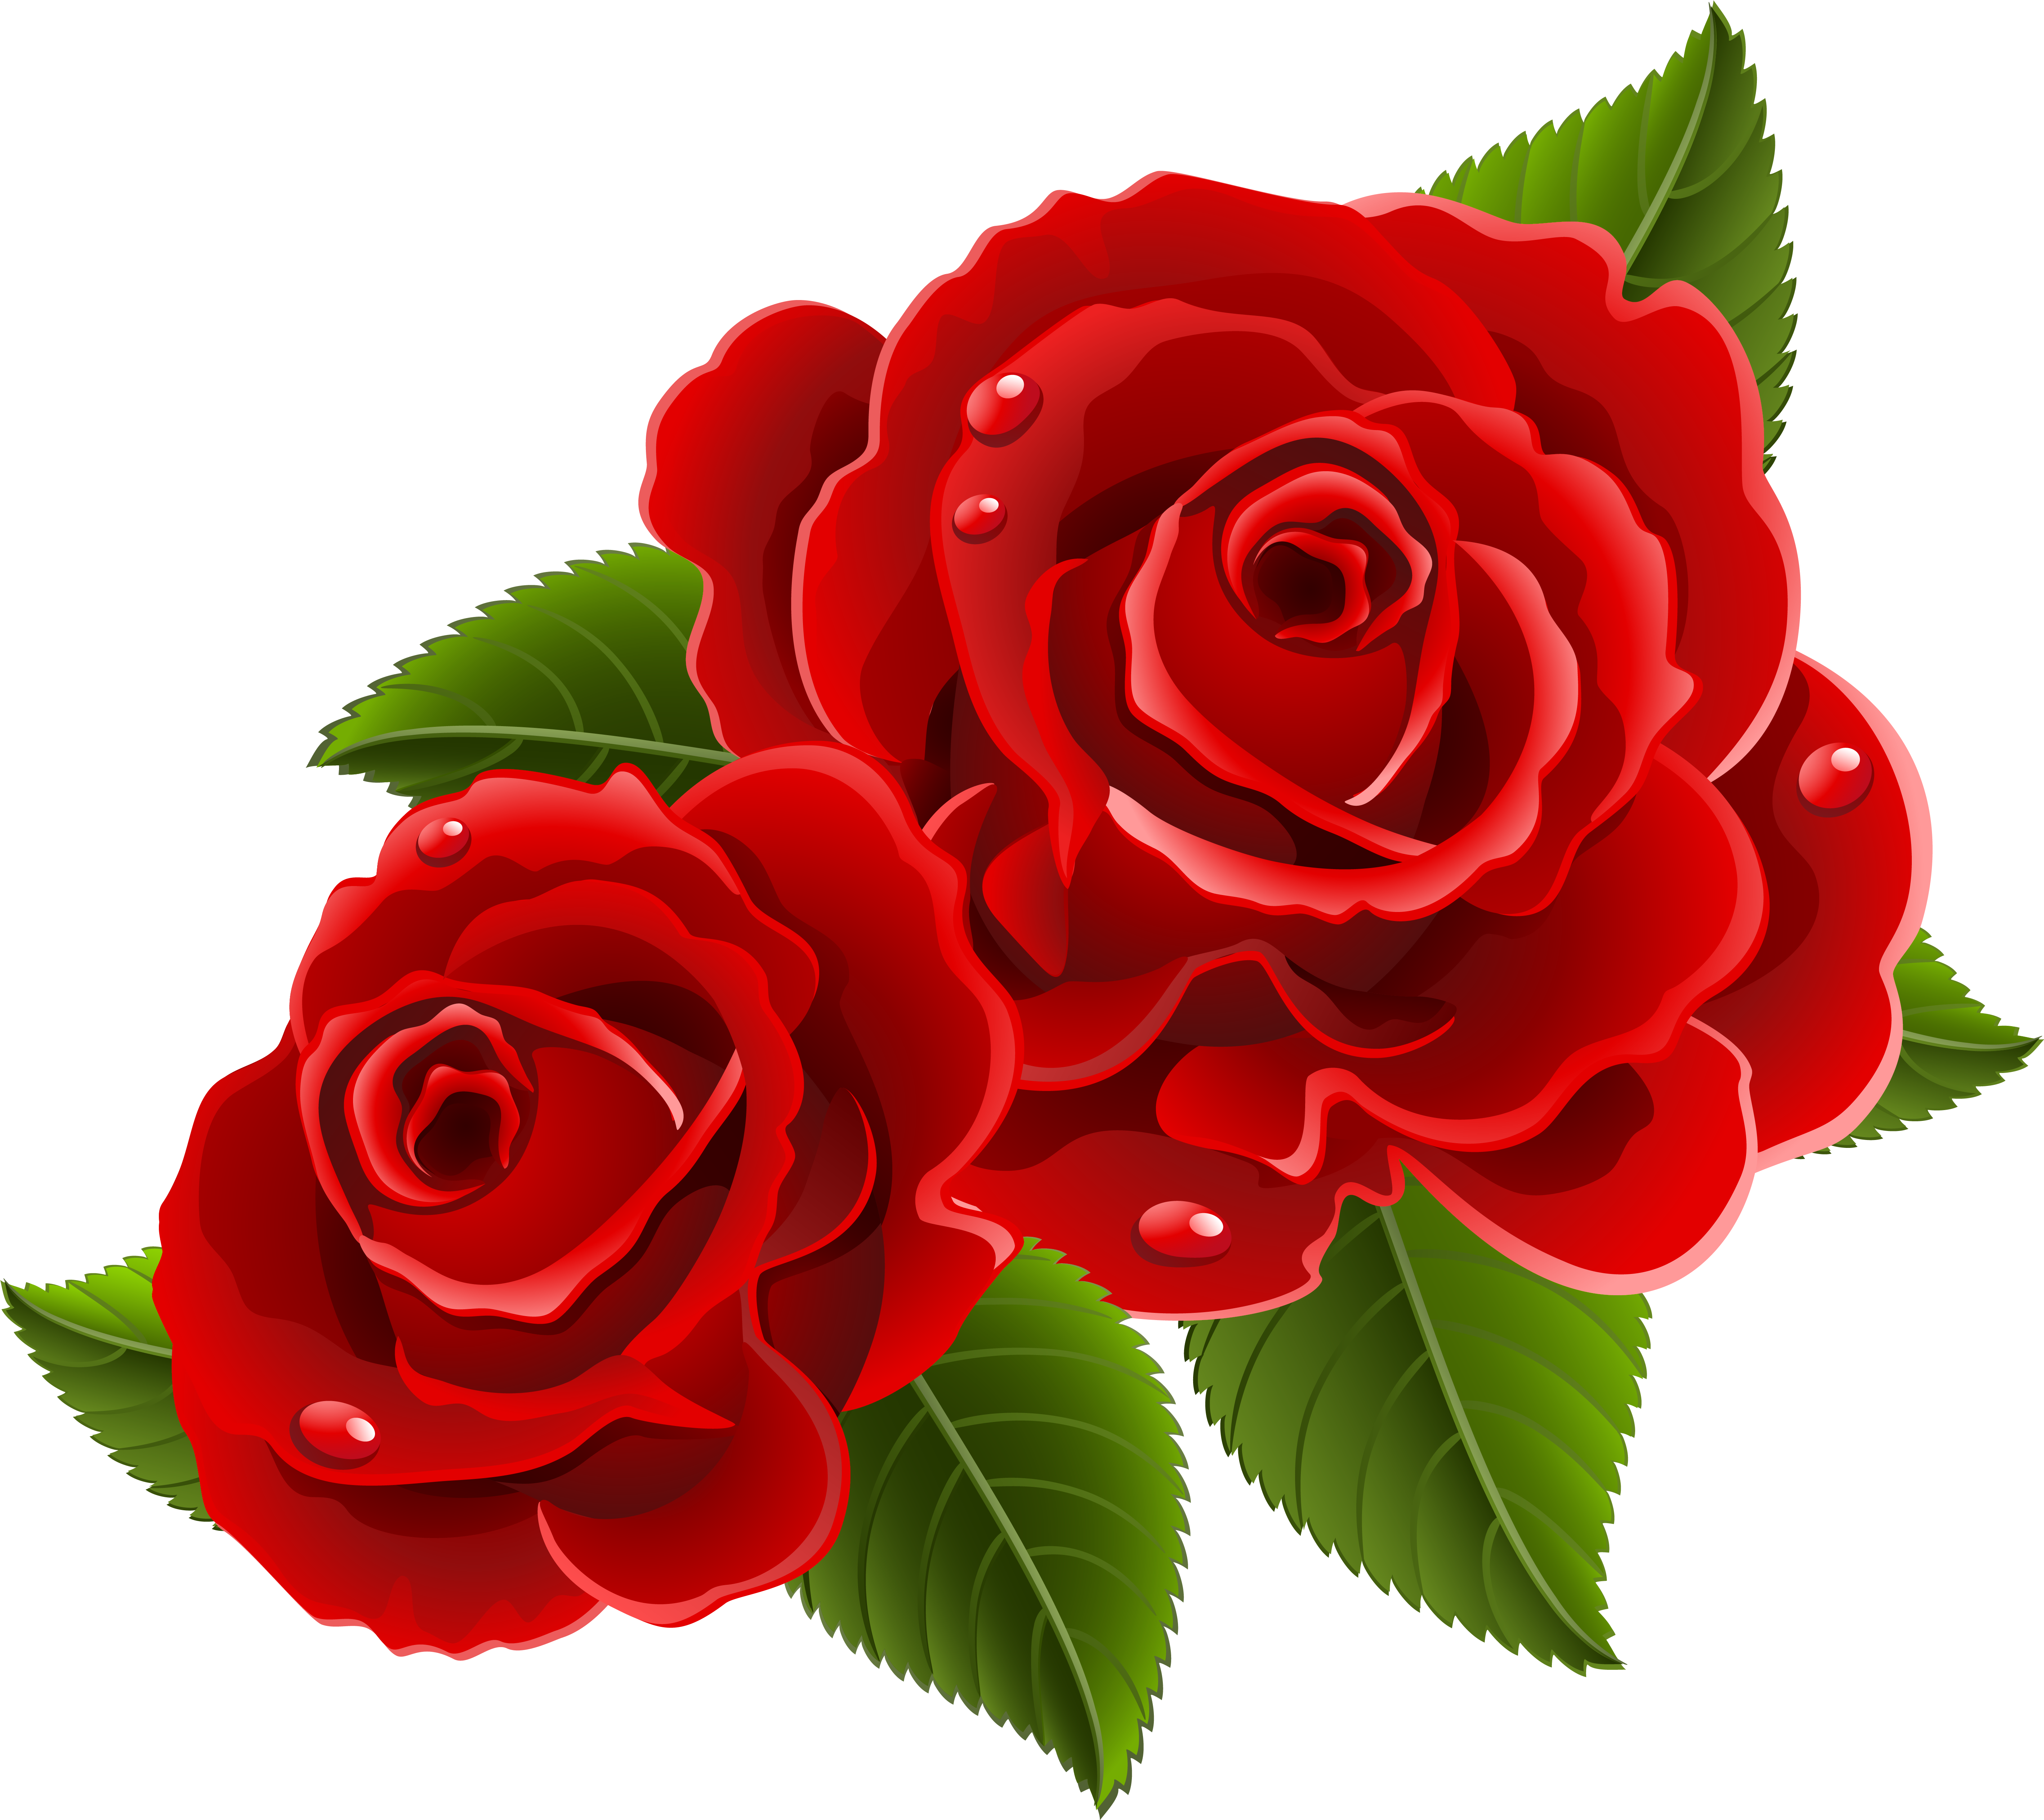 Red Deco Rose Png Clip Art Image Rose Flower Pictures Flower Drawing ...